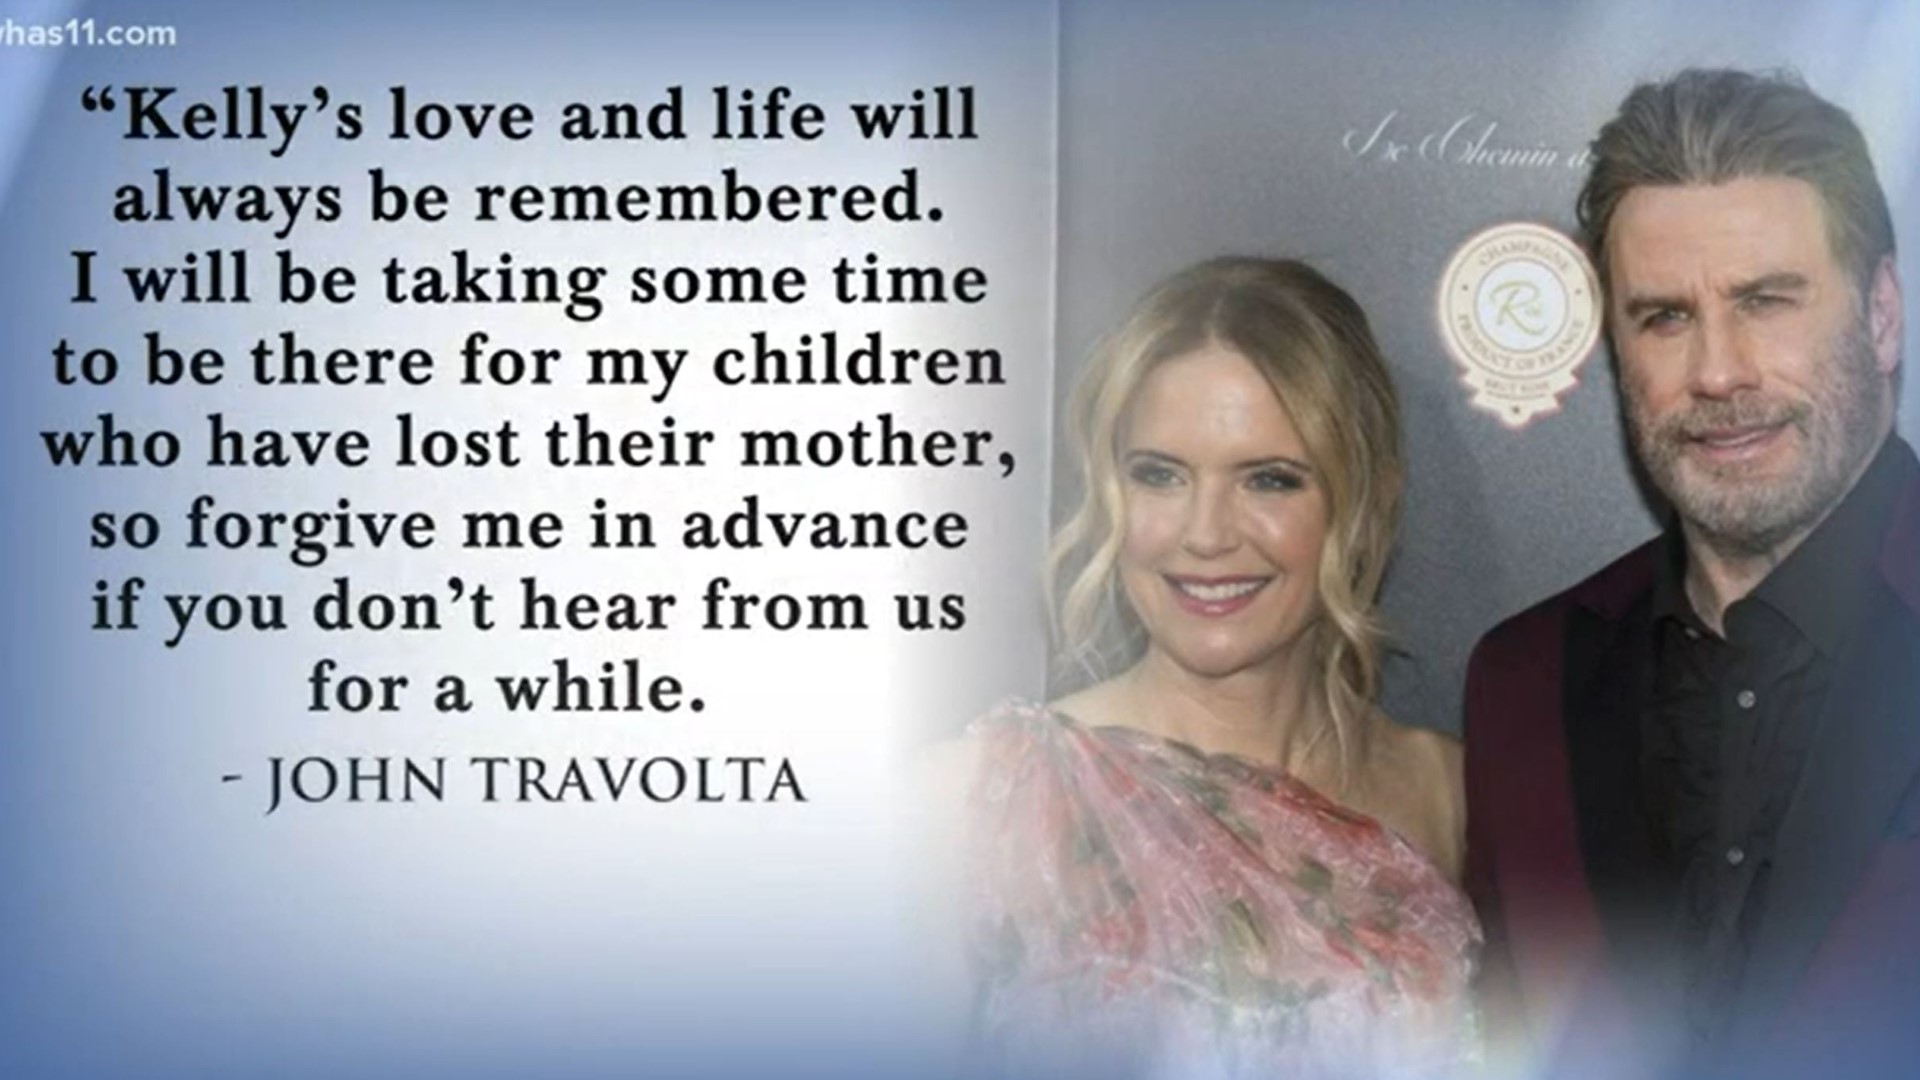 Travolta said in an Instagram post that his wife of 28 years died after a two-year battle with breast cancer.